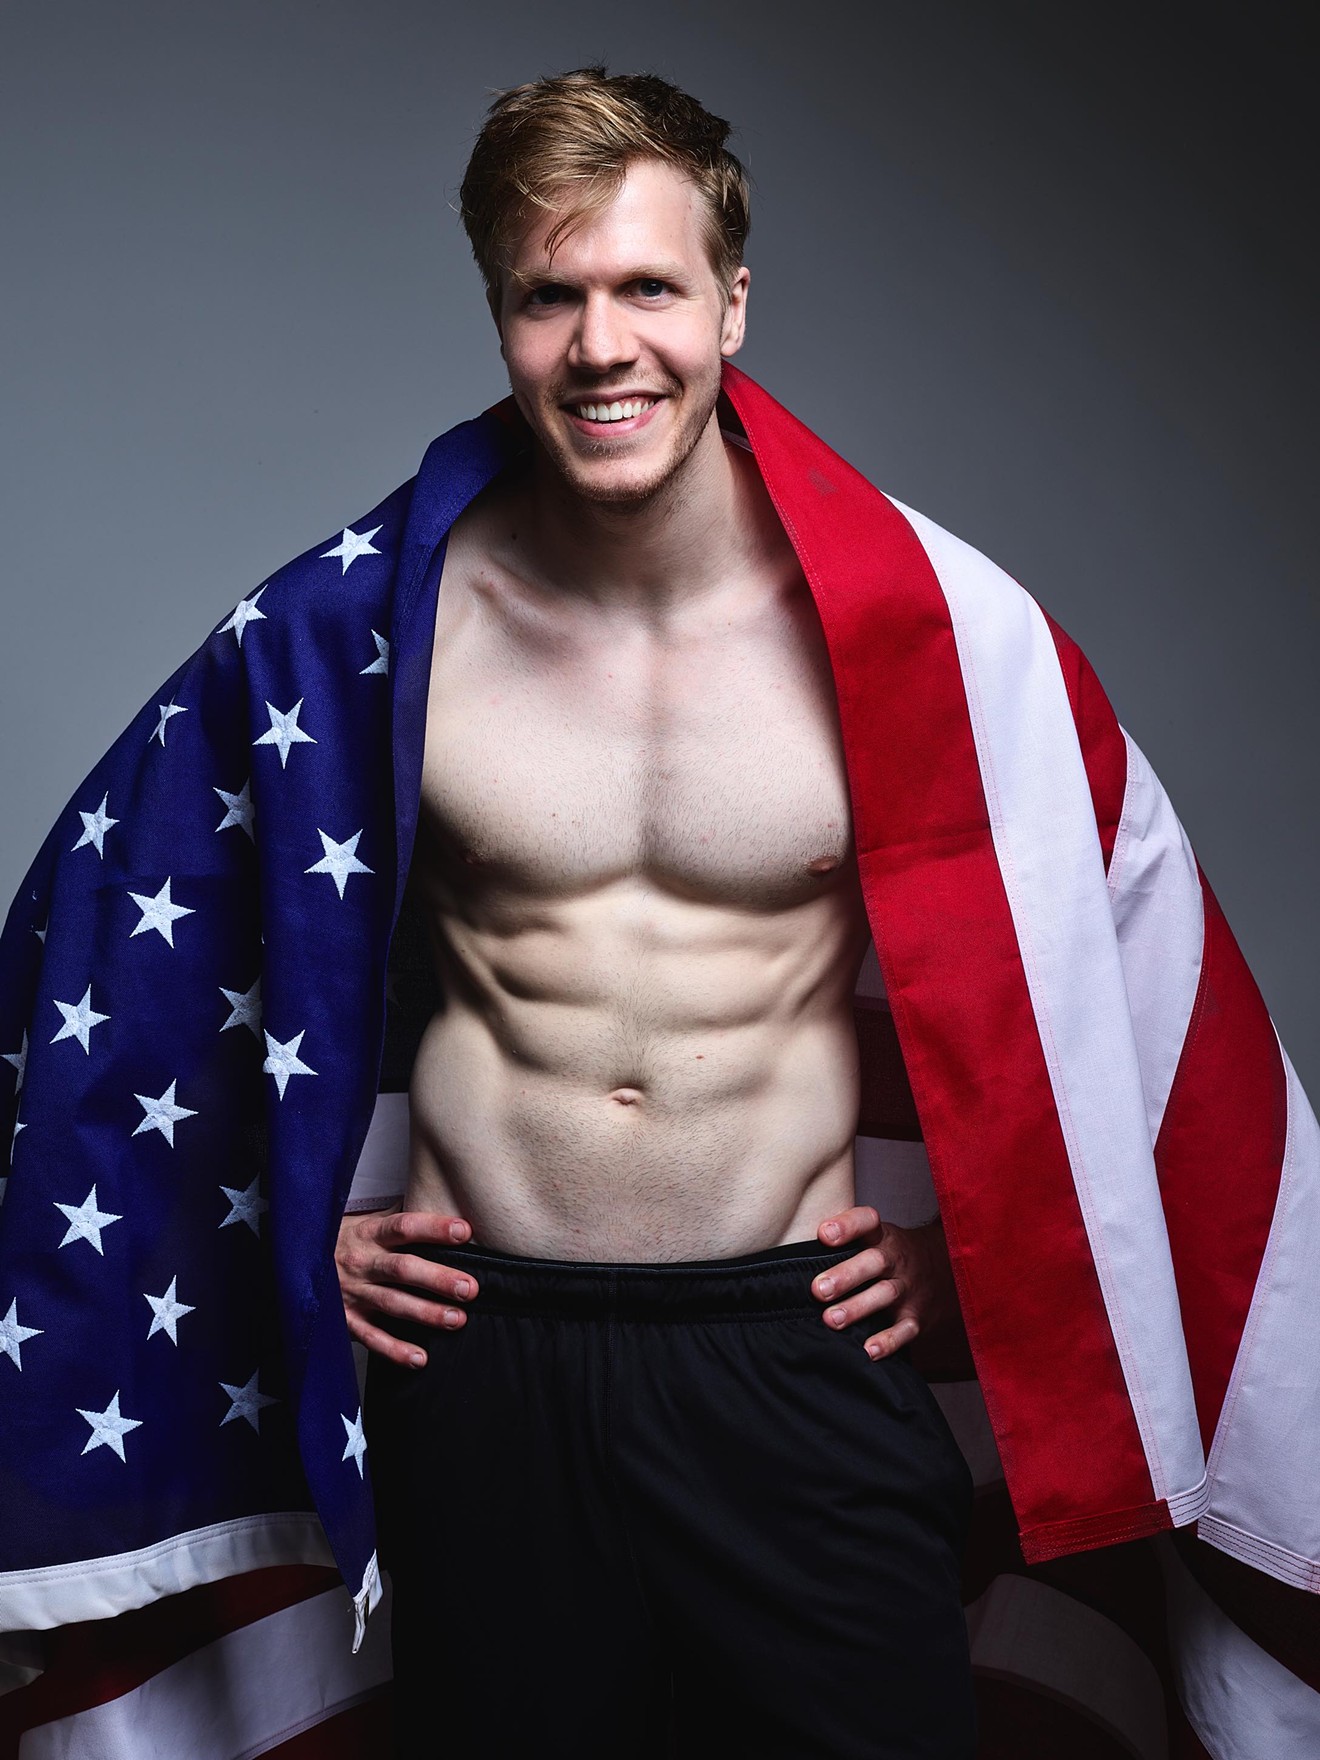 Patrick Lyons and his abs competed on American Ninja Warrior.